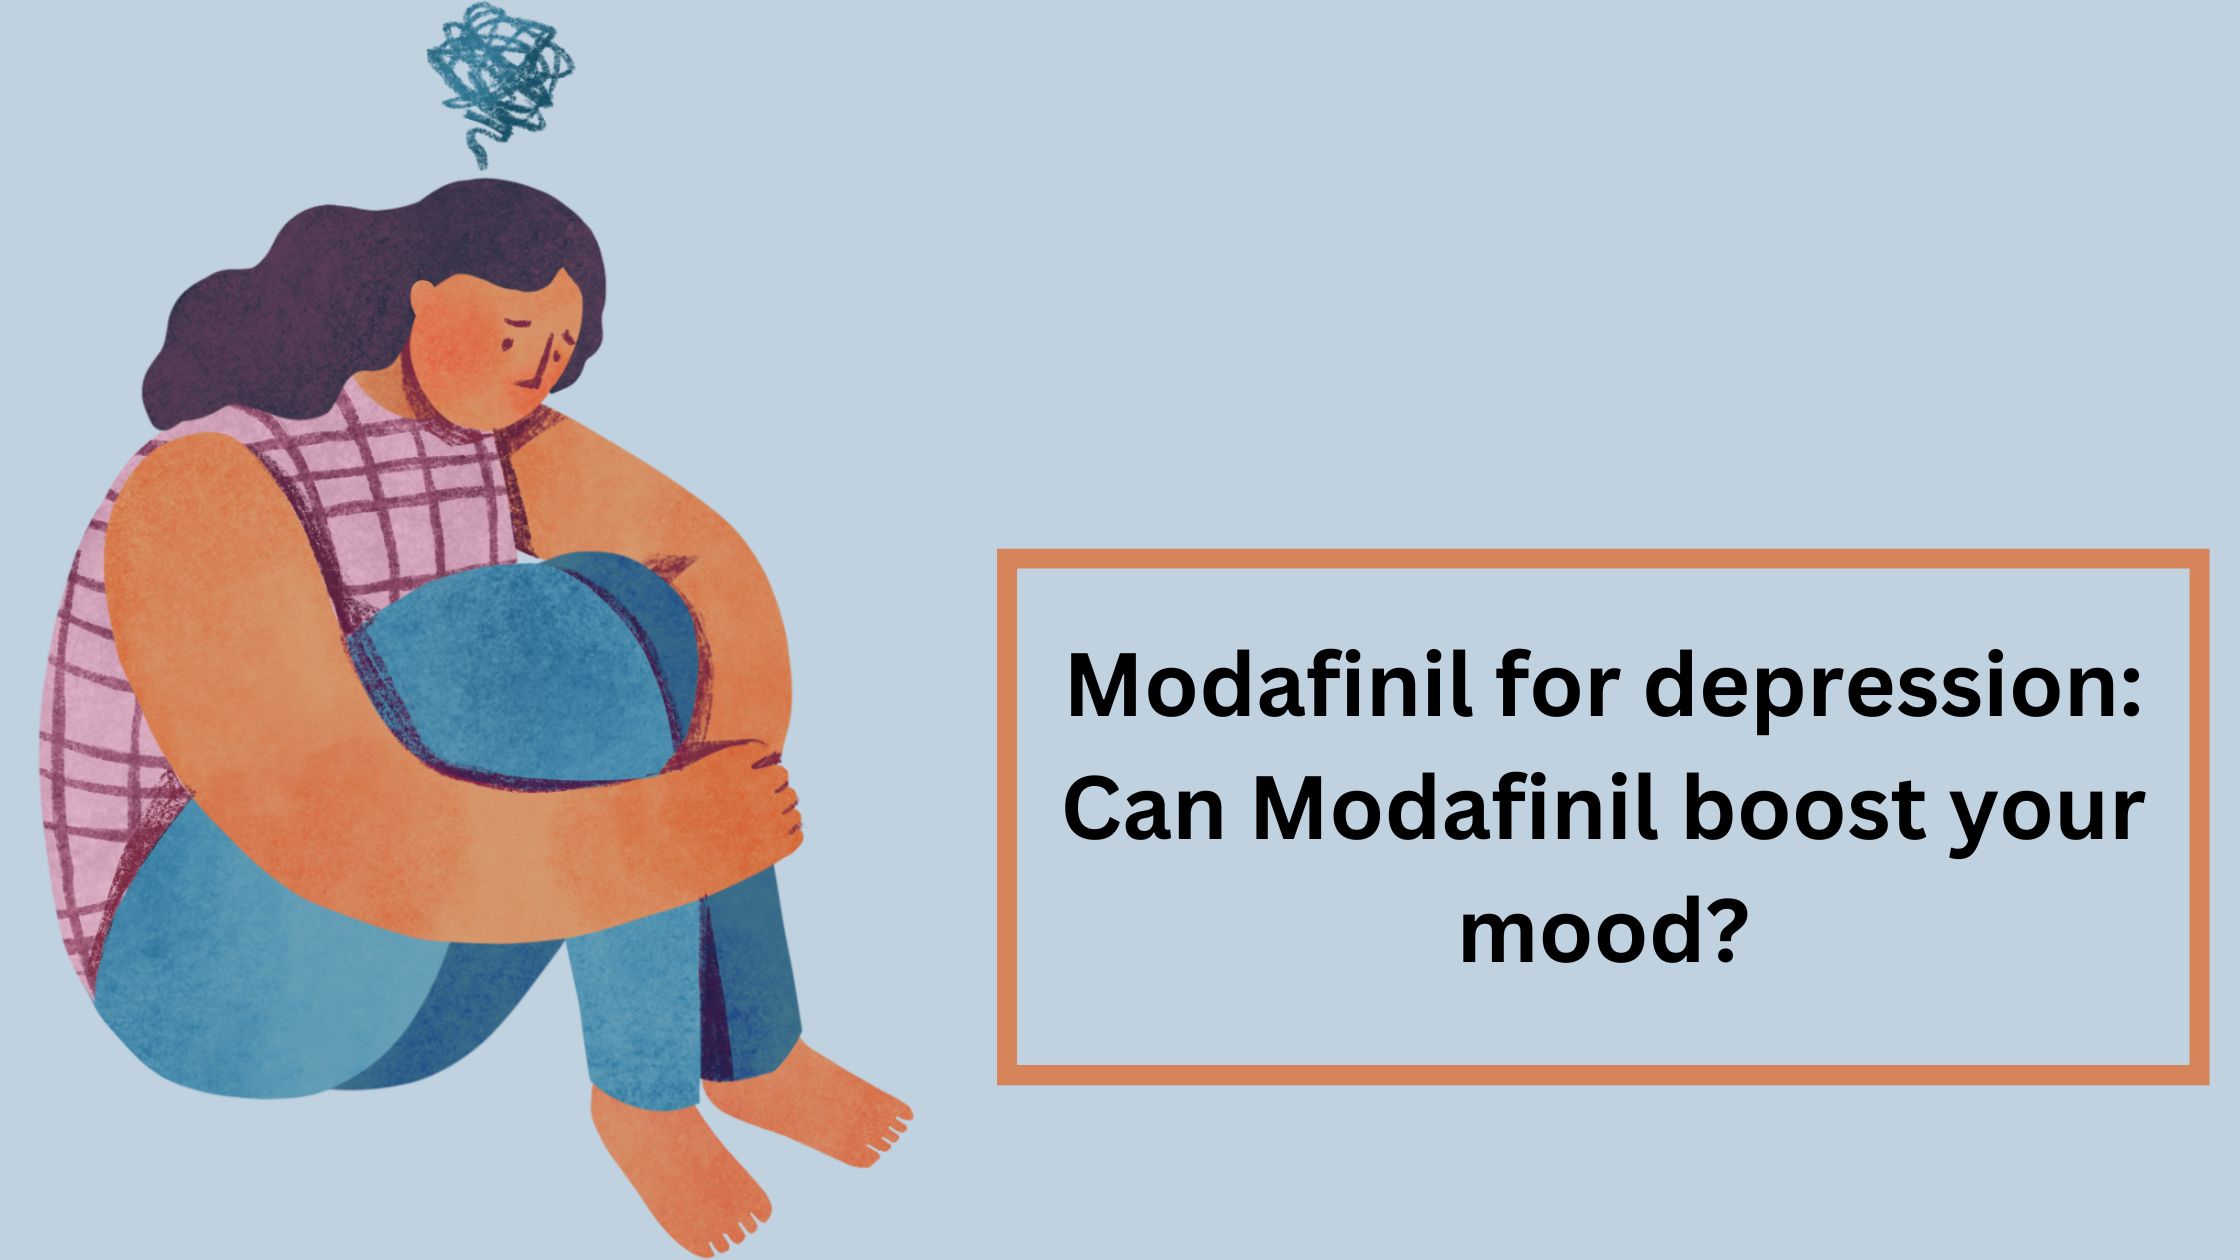 Modafinil For Depression: Can Modafinil Boost Up Your Mood?